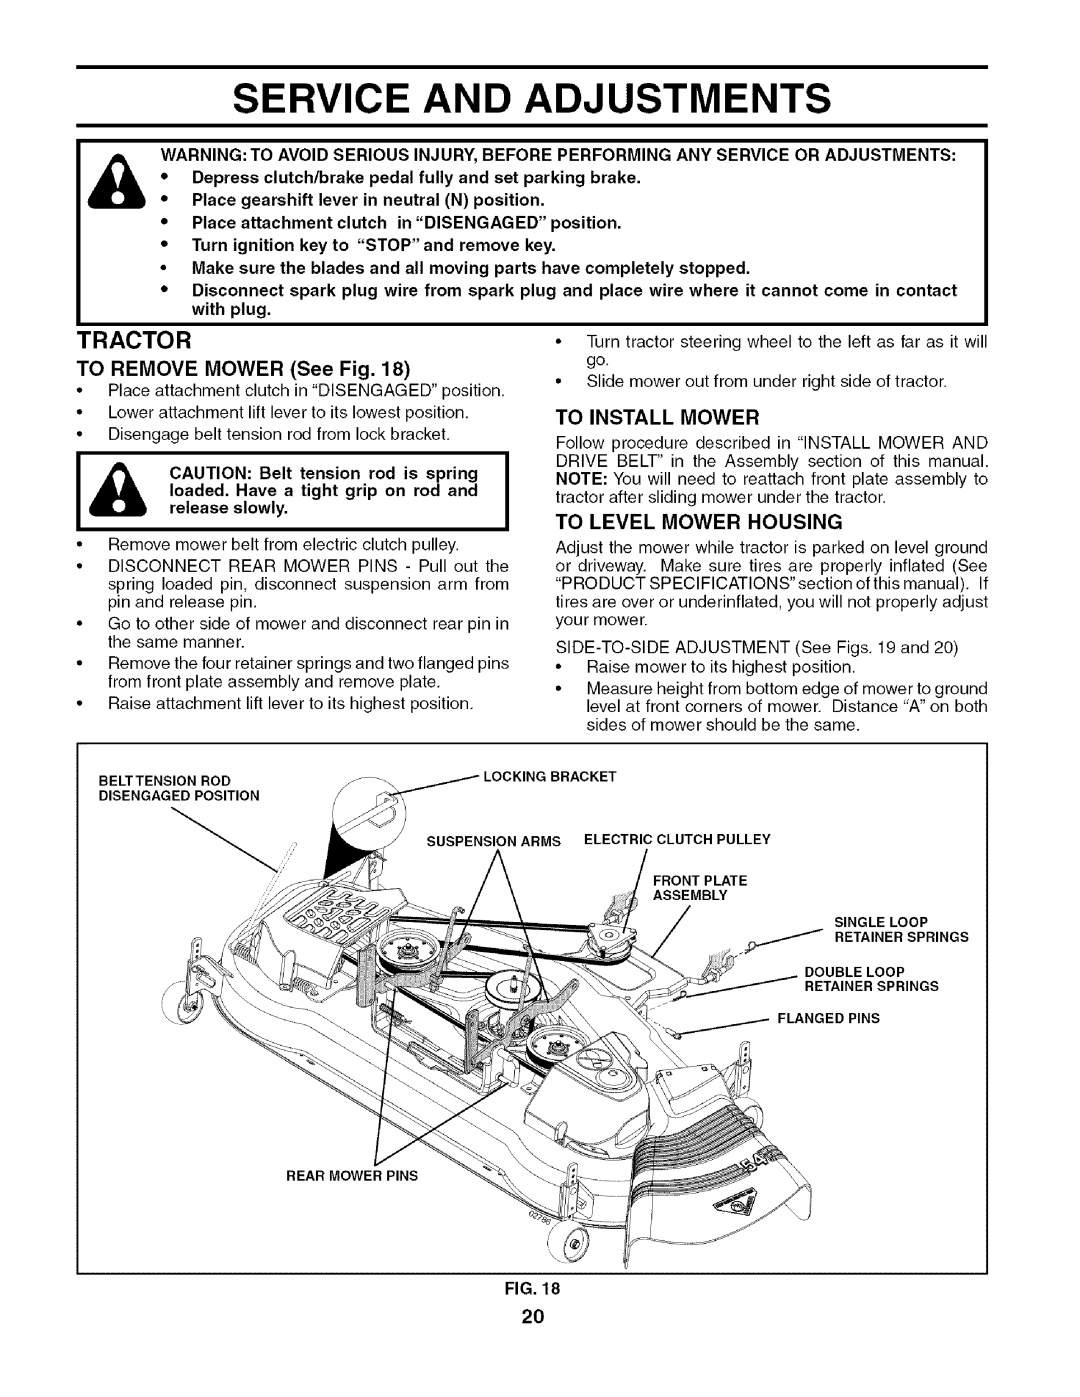 Husqvarna 917.27909 owner manual Service and Adjustments, To Remove Mower See Fig, To Install Mower, To Level Mower Housing 